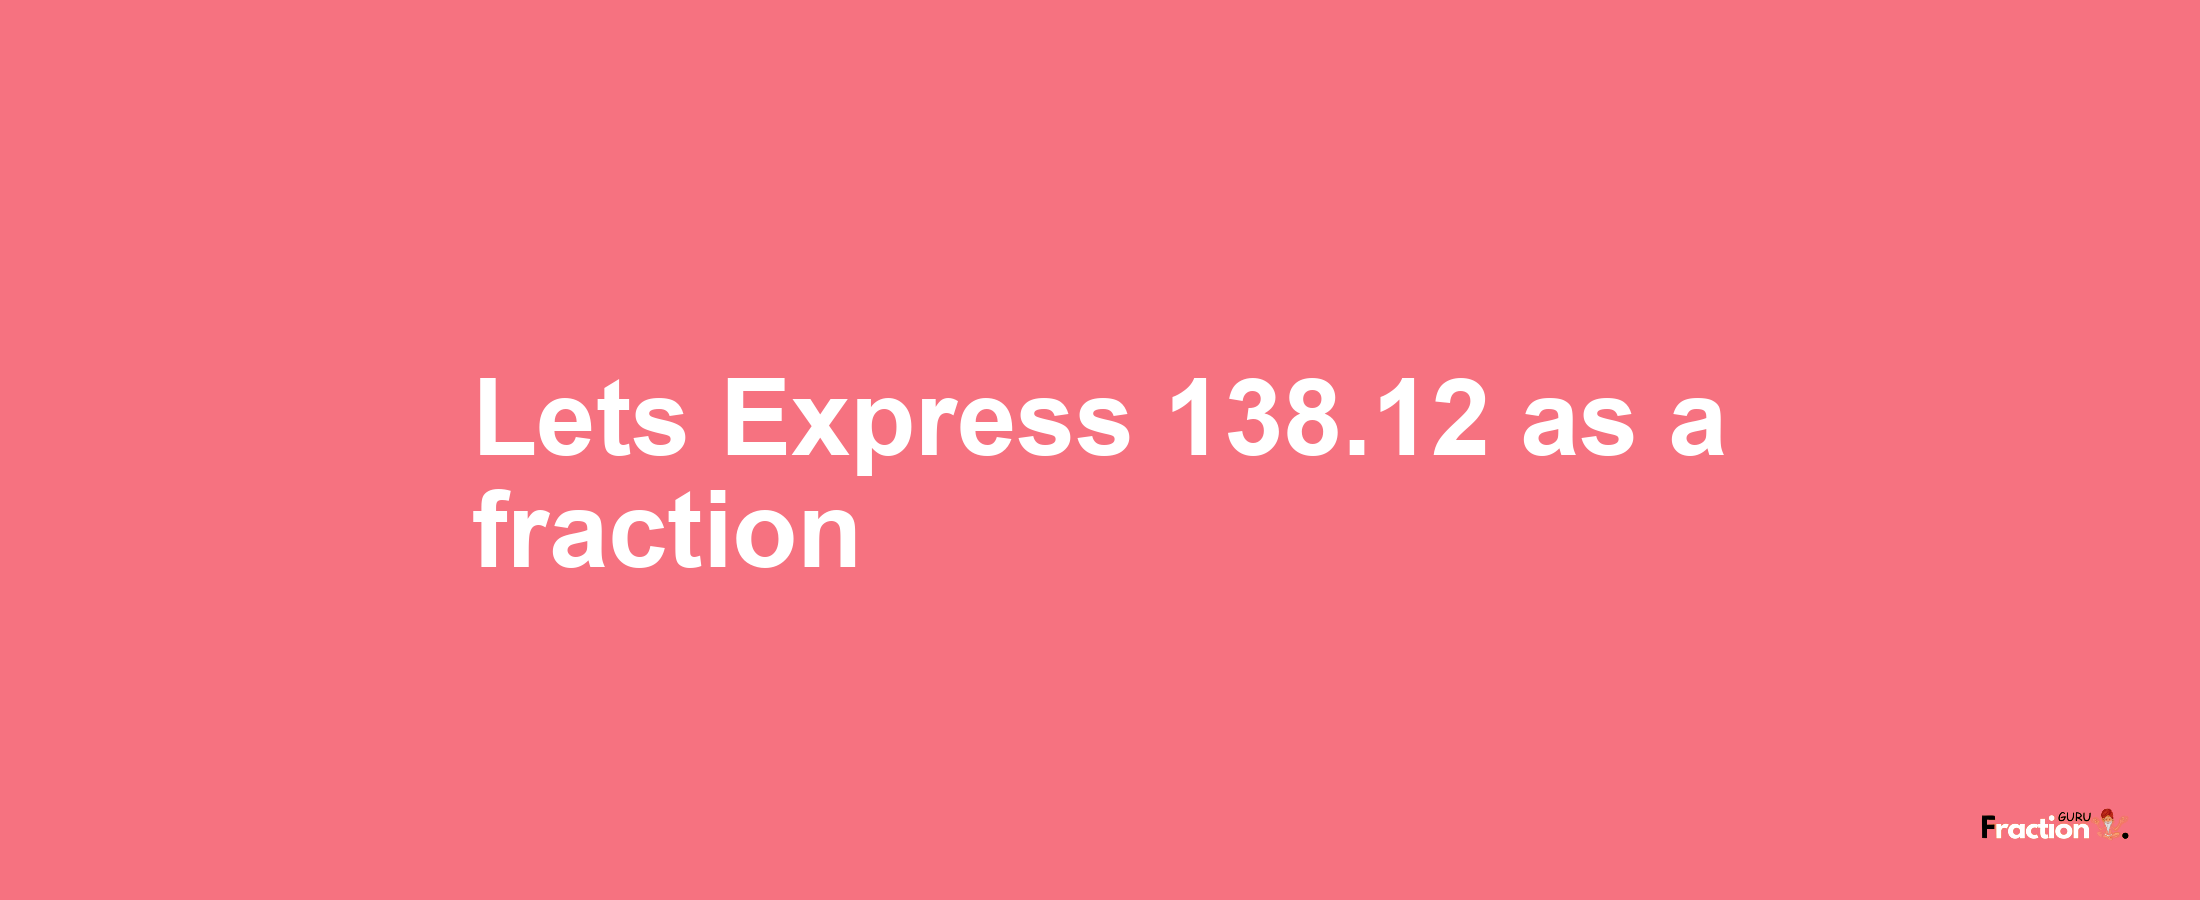 Lets Express 138.12 as afraction